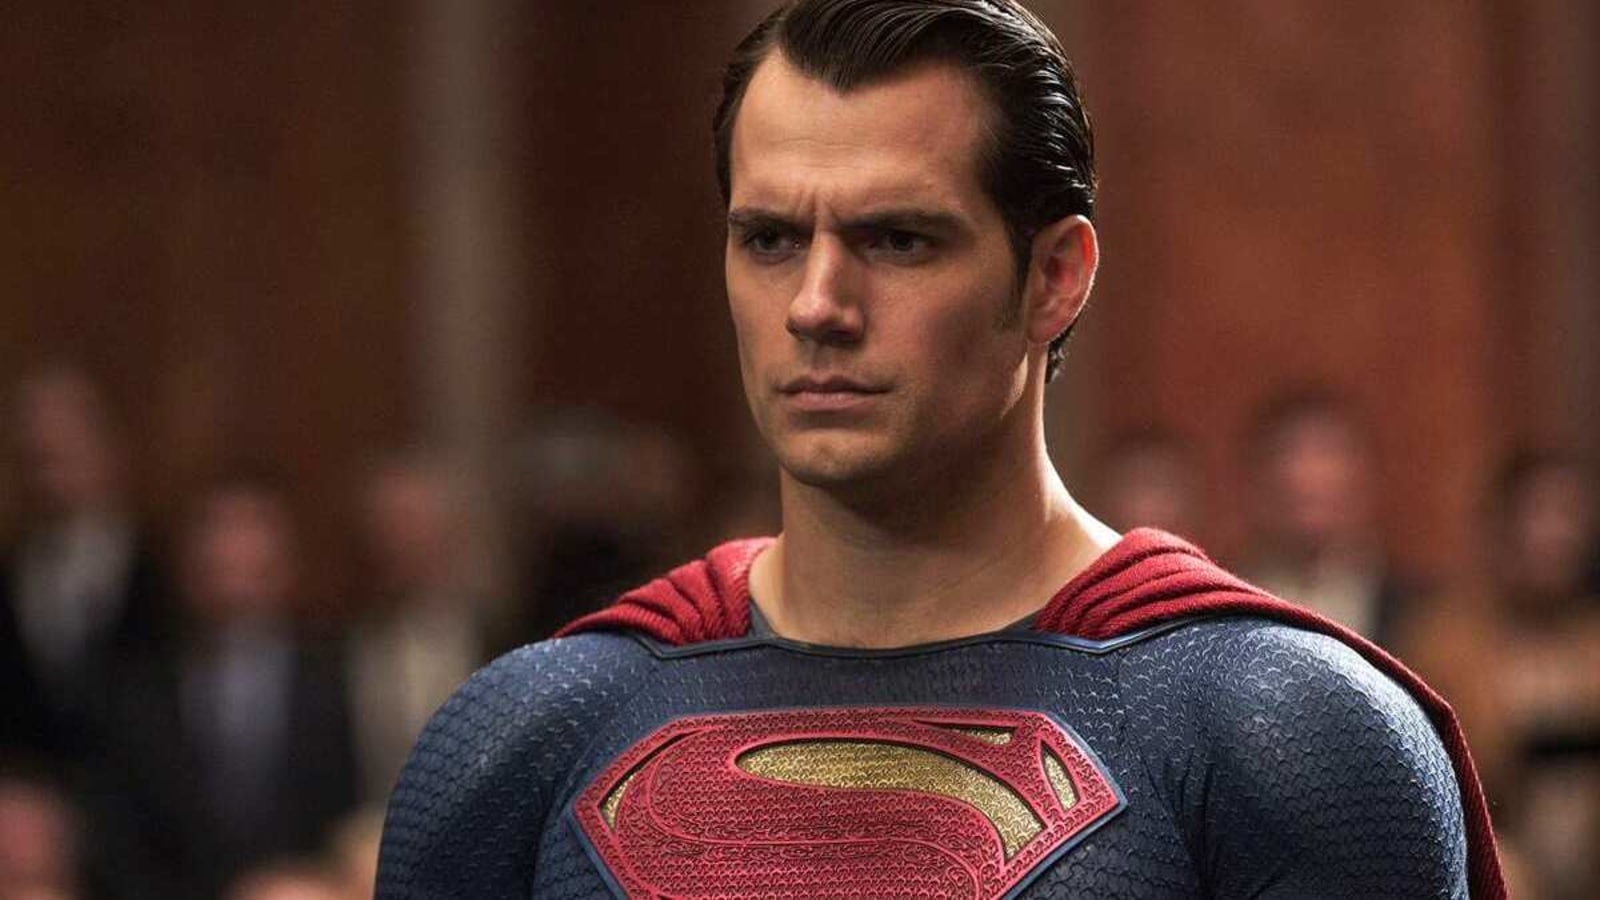 New Superman movie for Warner Bros. to be written by TaNehisi Coates